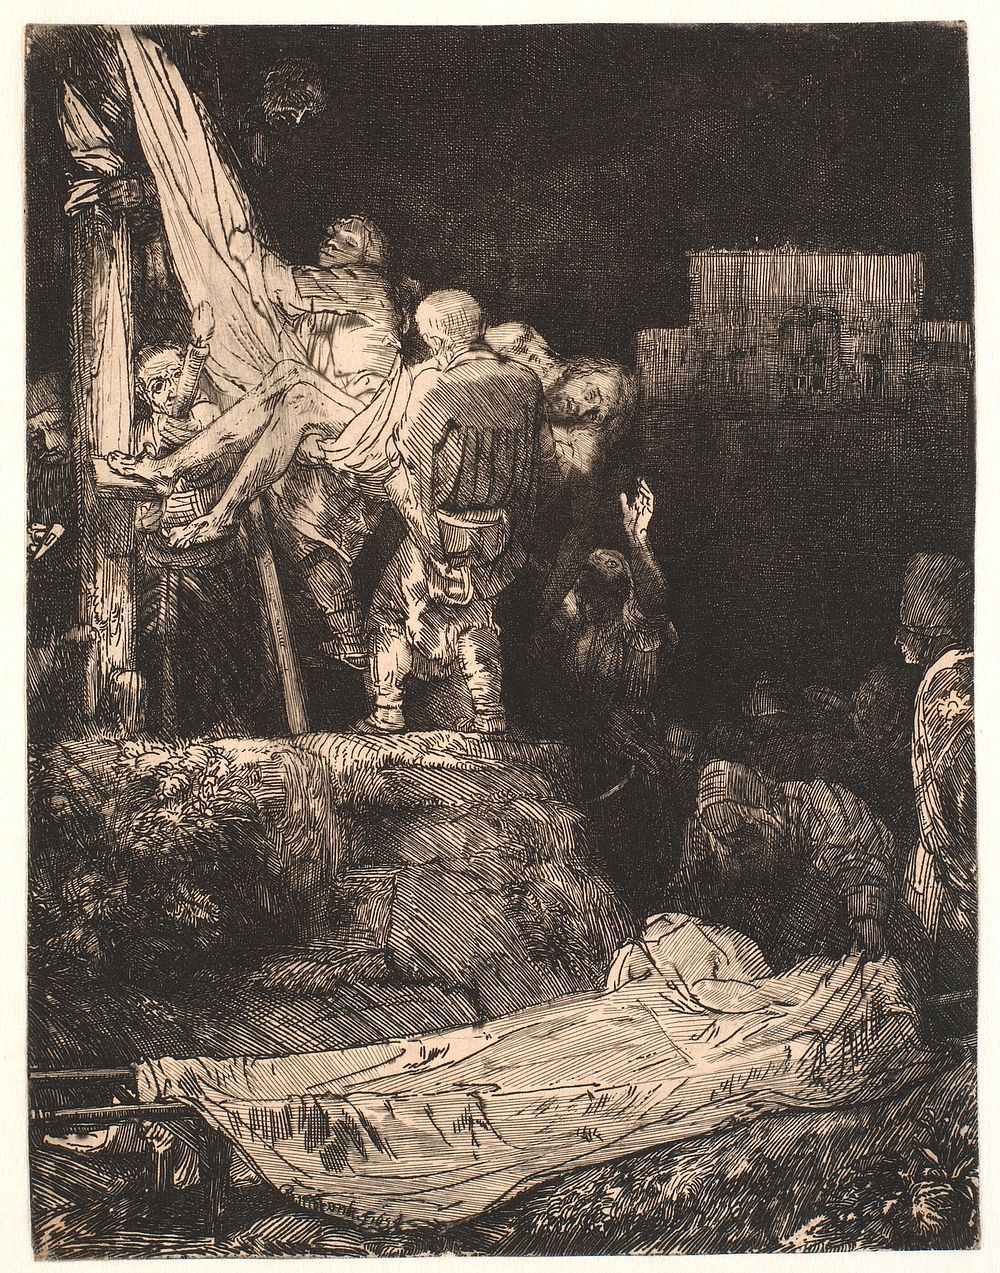 The taking down of the cross, by torchlight by Rembrandt van Rijn